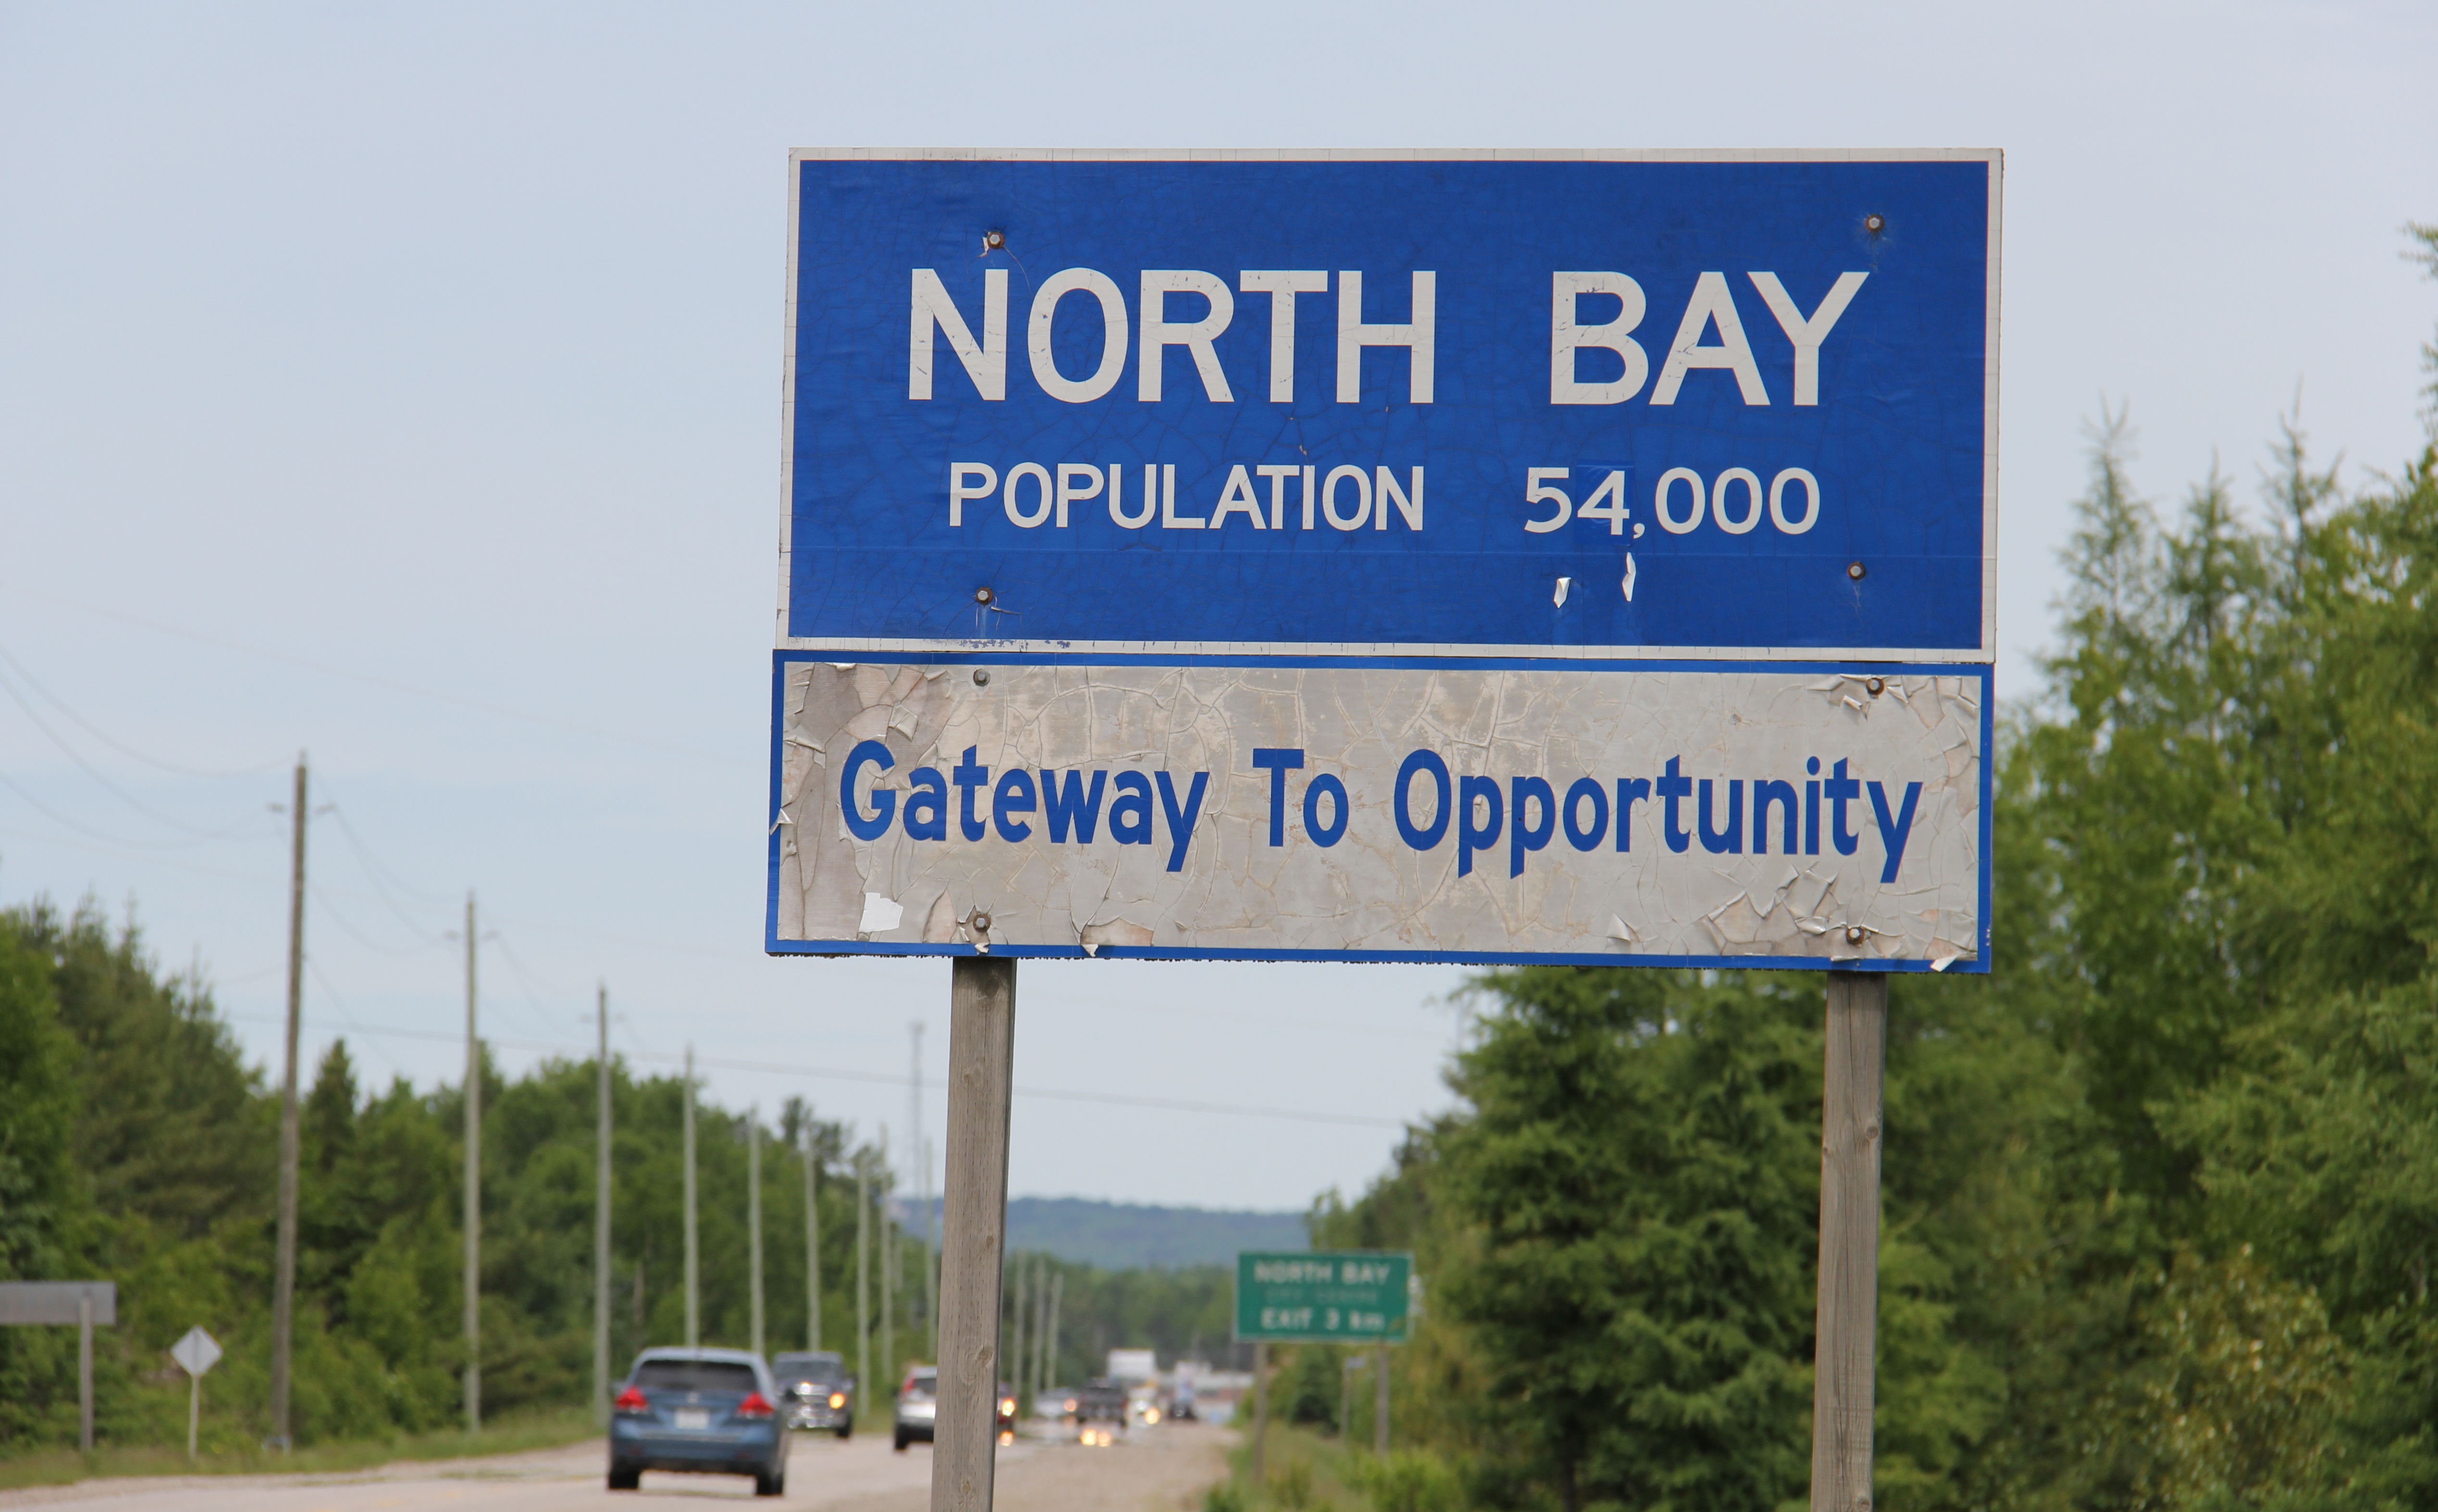 The City of North Bay